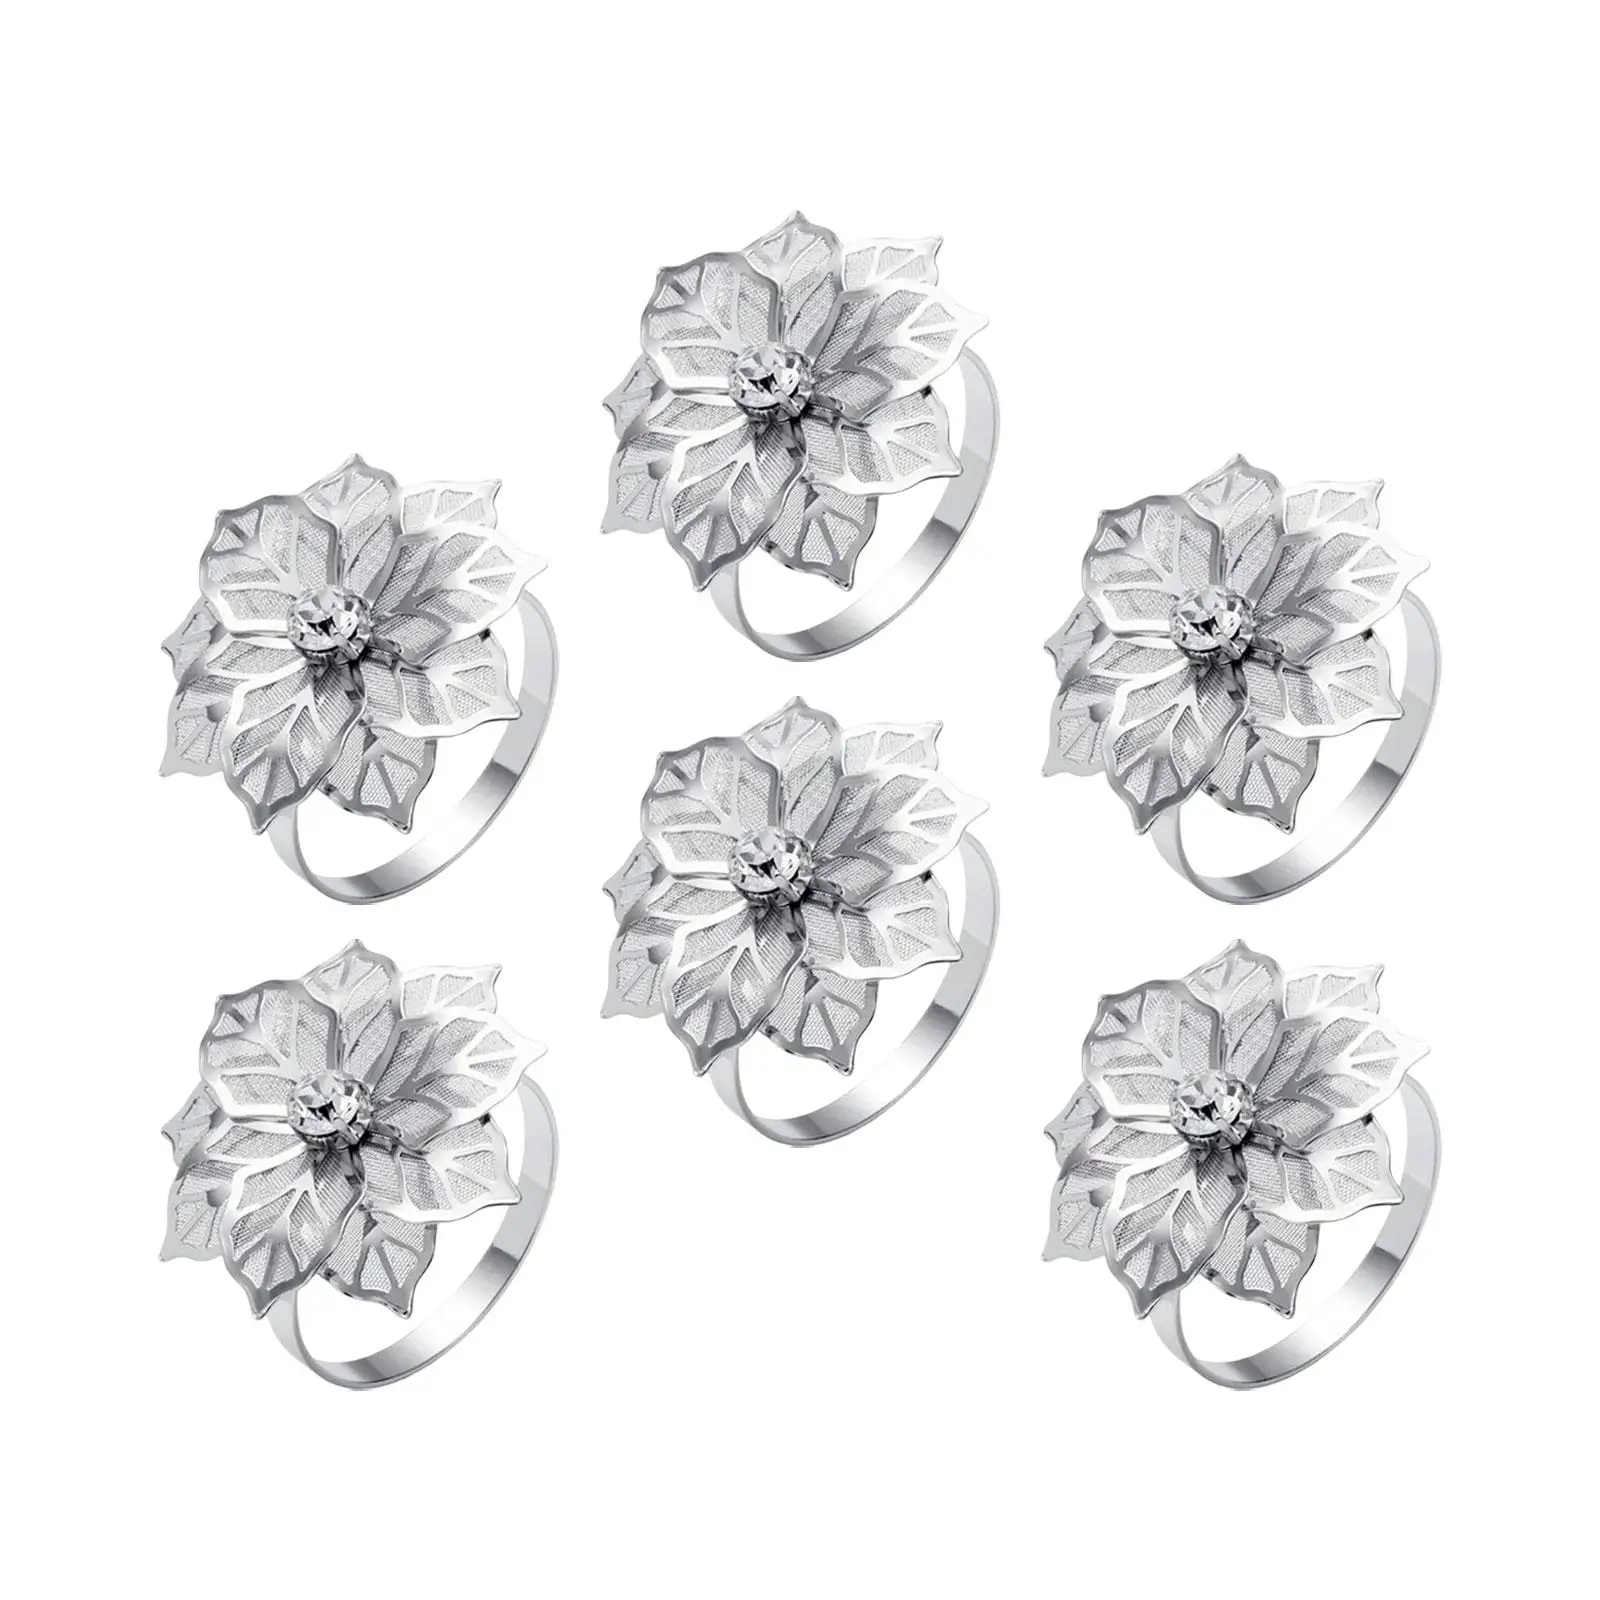 6Pcs Flowers Napkin Rings Decoration Floral Crafts Rhinestone Serviette Buckles for Dining Birthday Hotel Thanksgiving Holiday